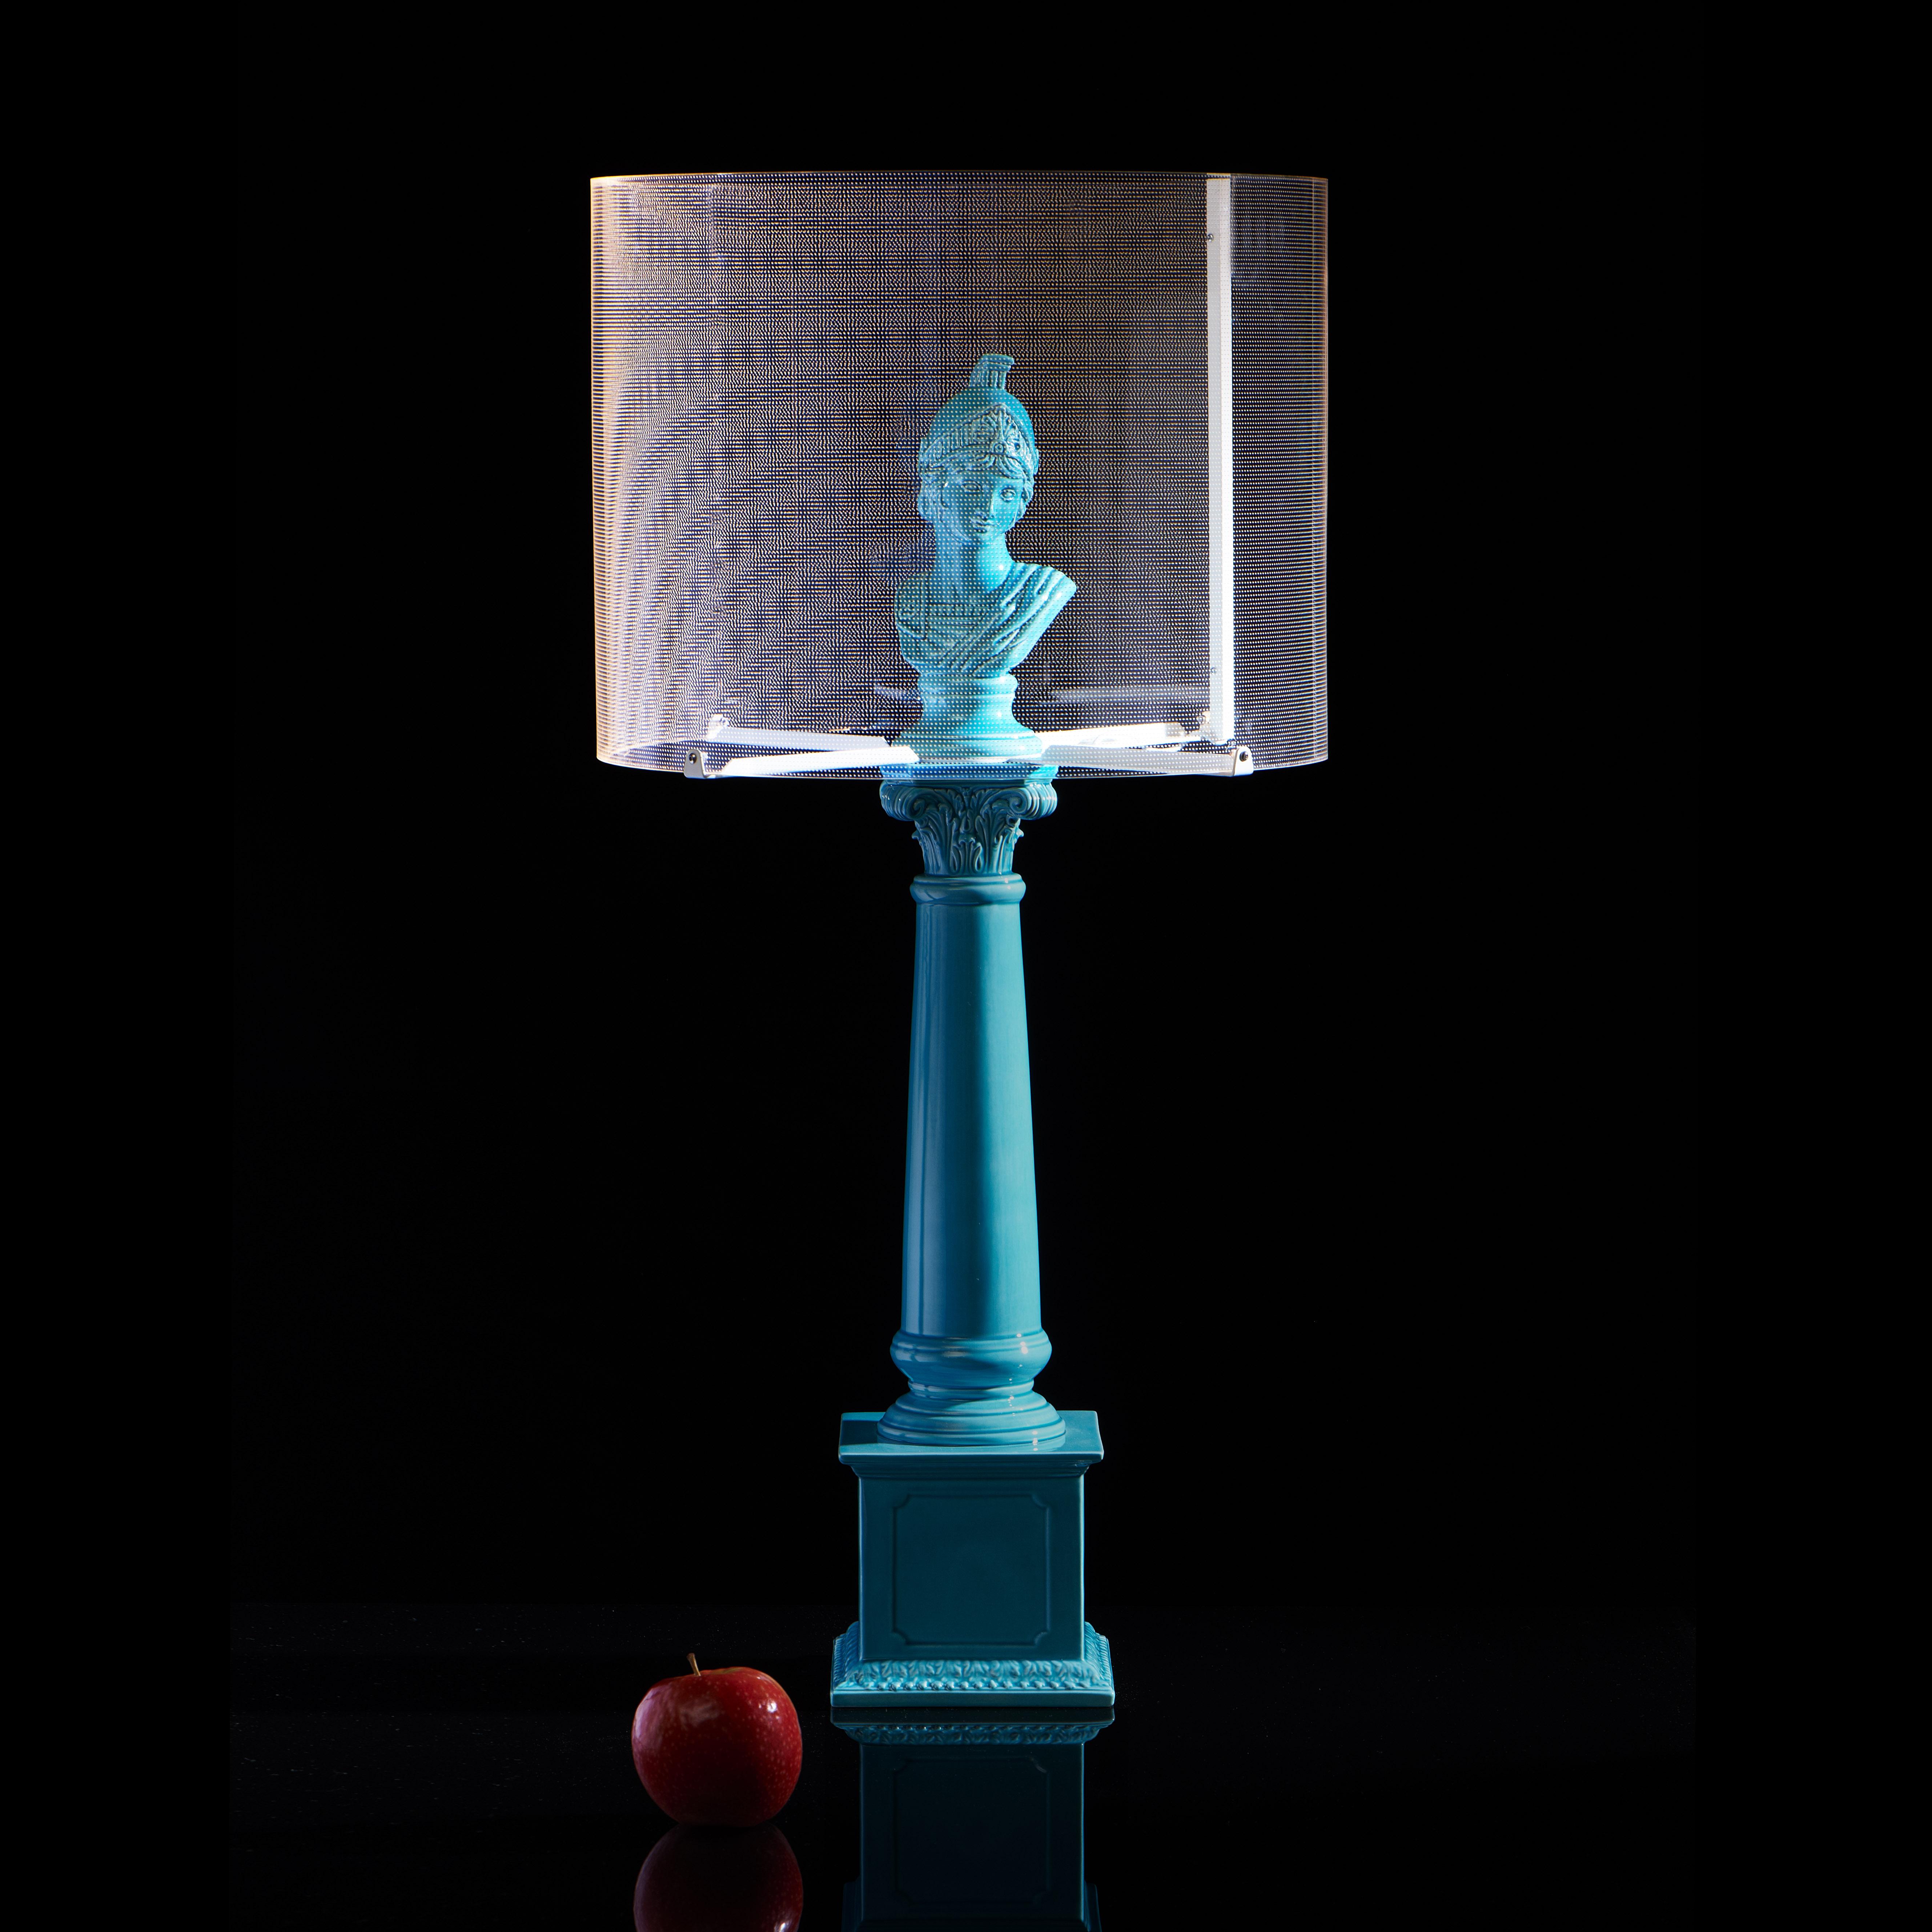 This elegant table lamp brings together innovation and Classical myth for a unique lighting experience. The lamp’s body is crafted from high-quality ceramic in the Venetian tradition, entirely hand-finished. Its bold personality and distinctive